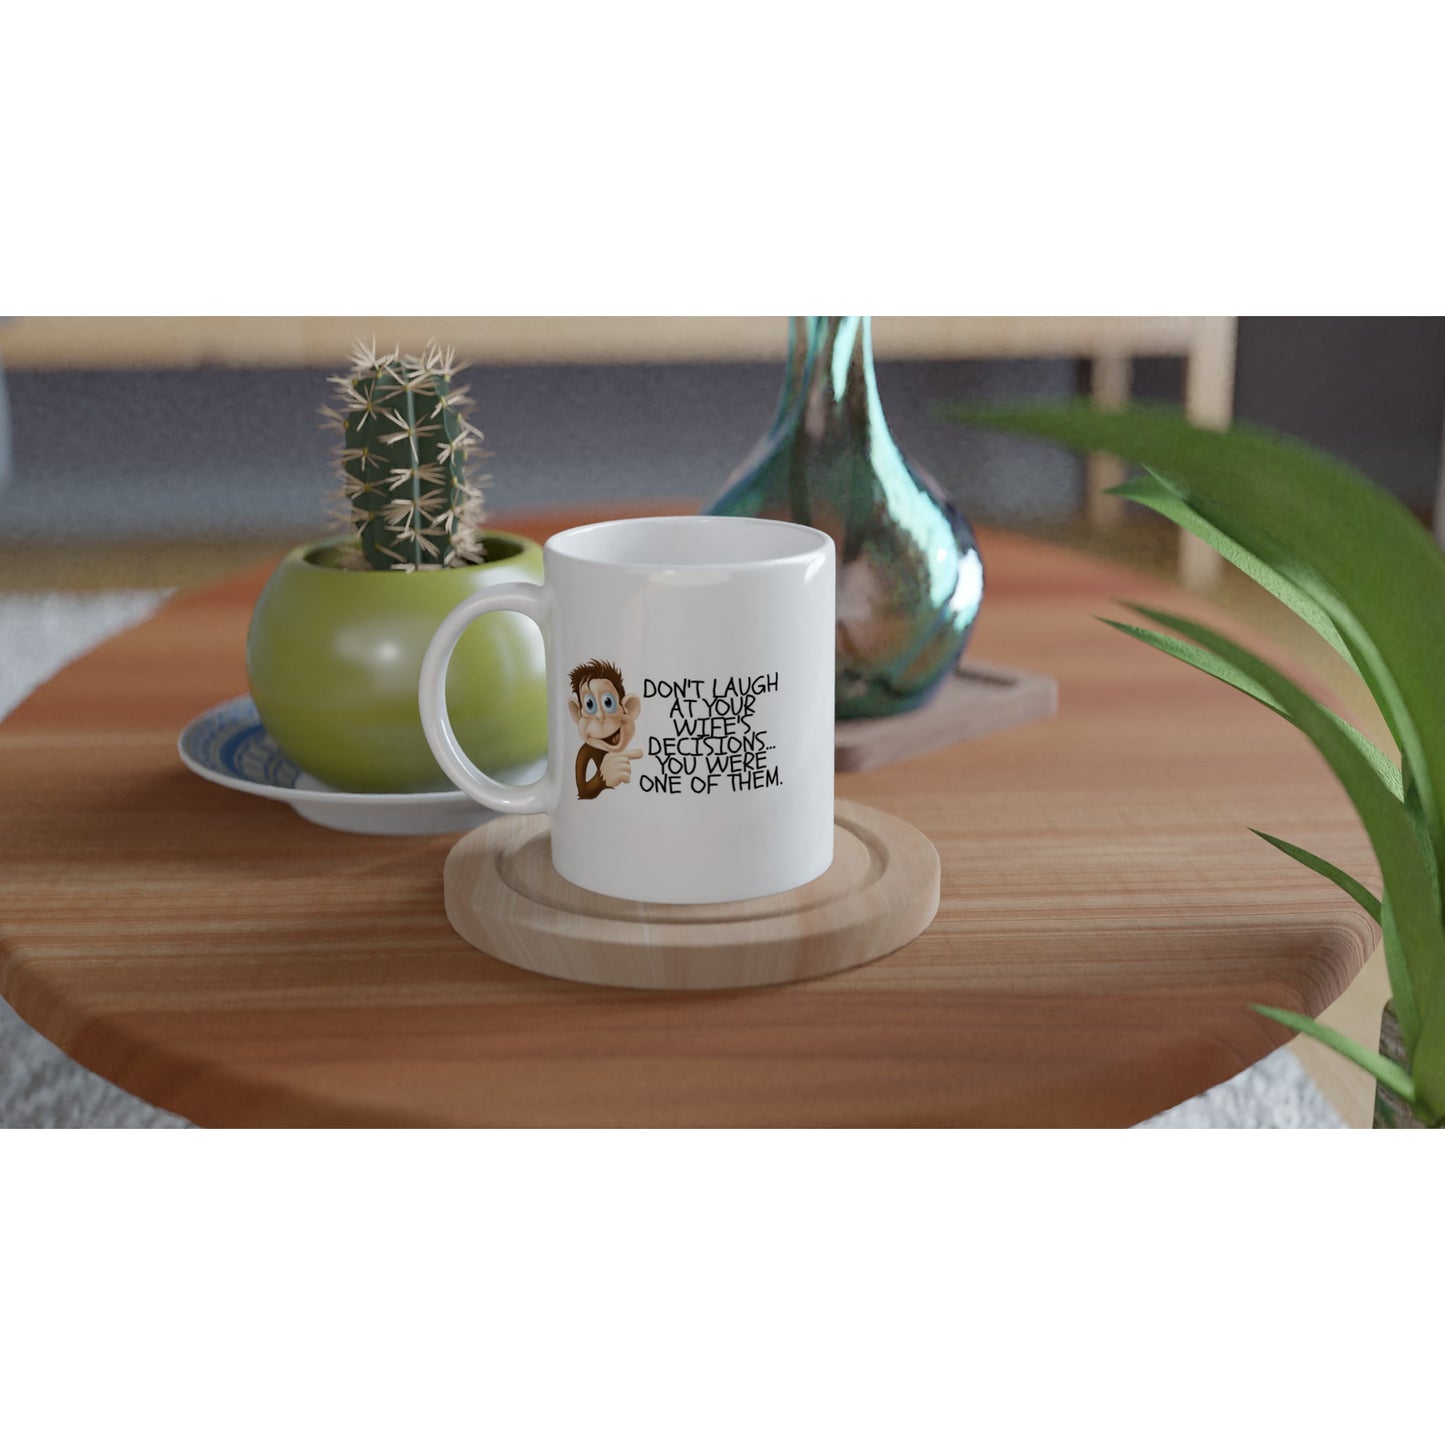 Don't Laugh At Your Wife's Decisions - White 11oz Ceramic Mug - Mister Snarky's